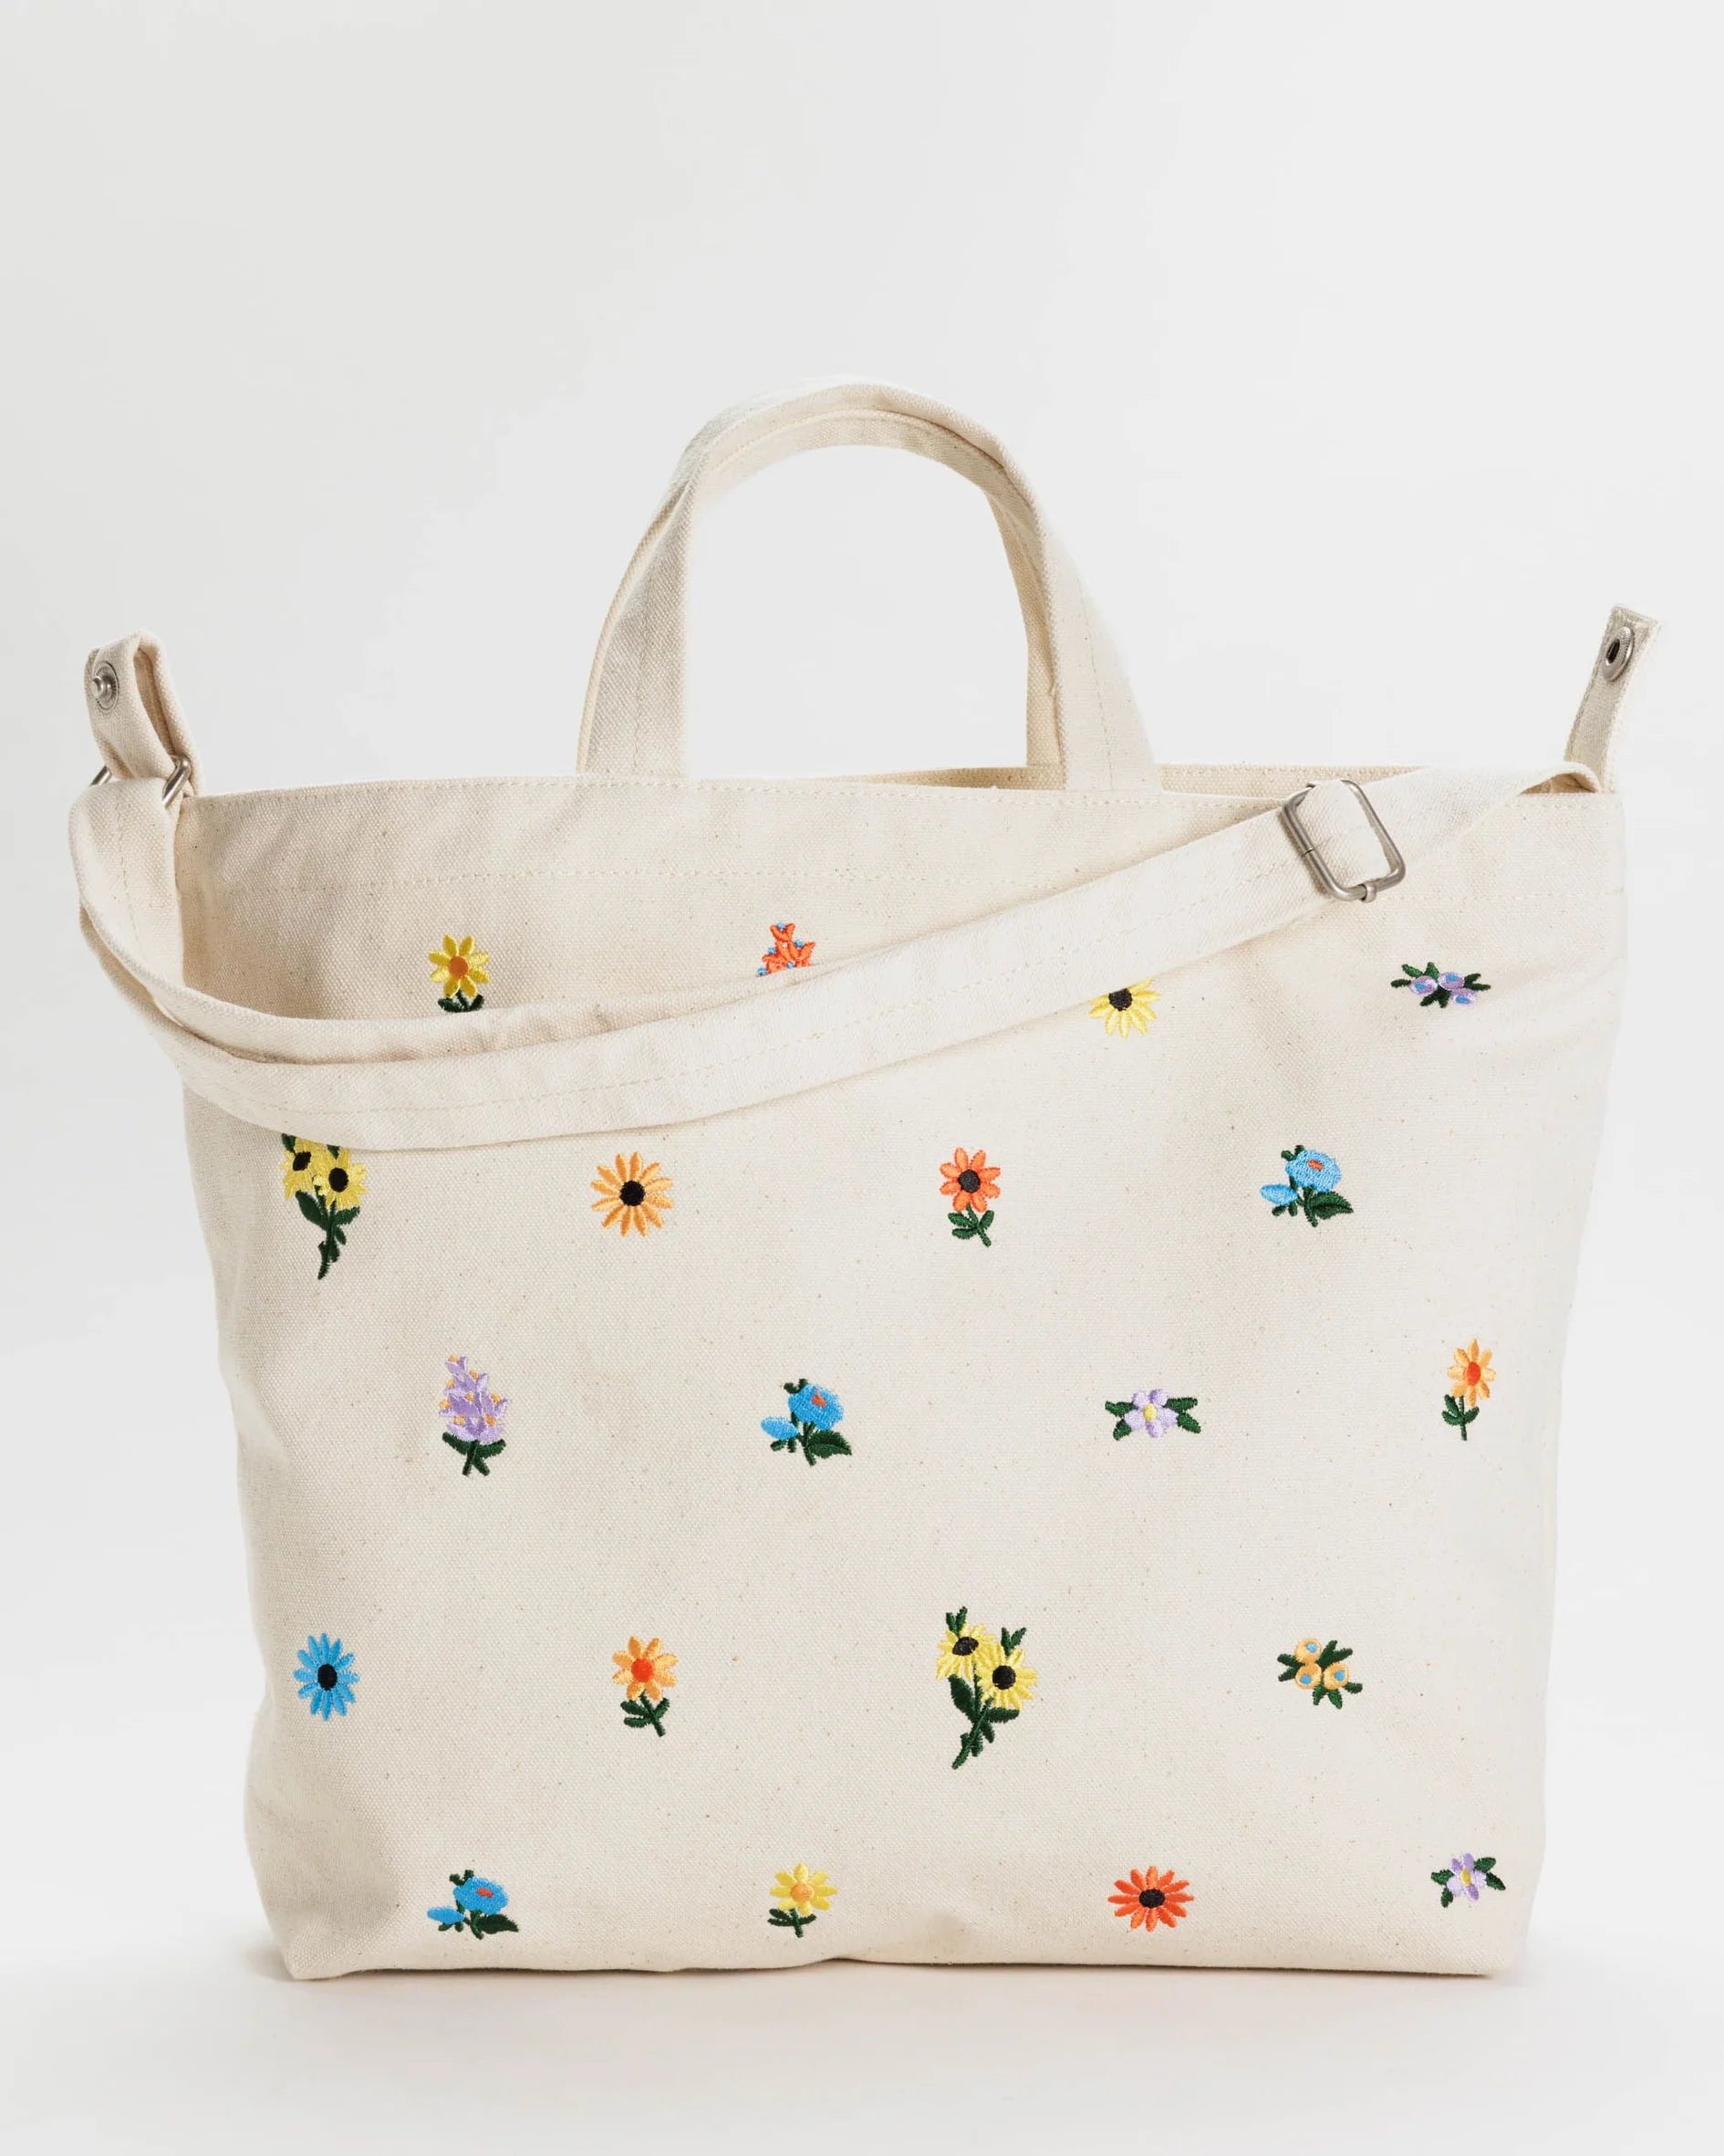 baggu horizontal zip duck bag in embroidered ditsy floral